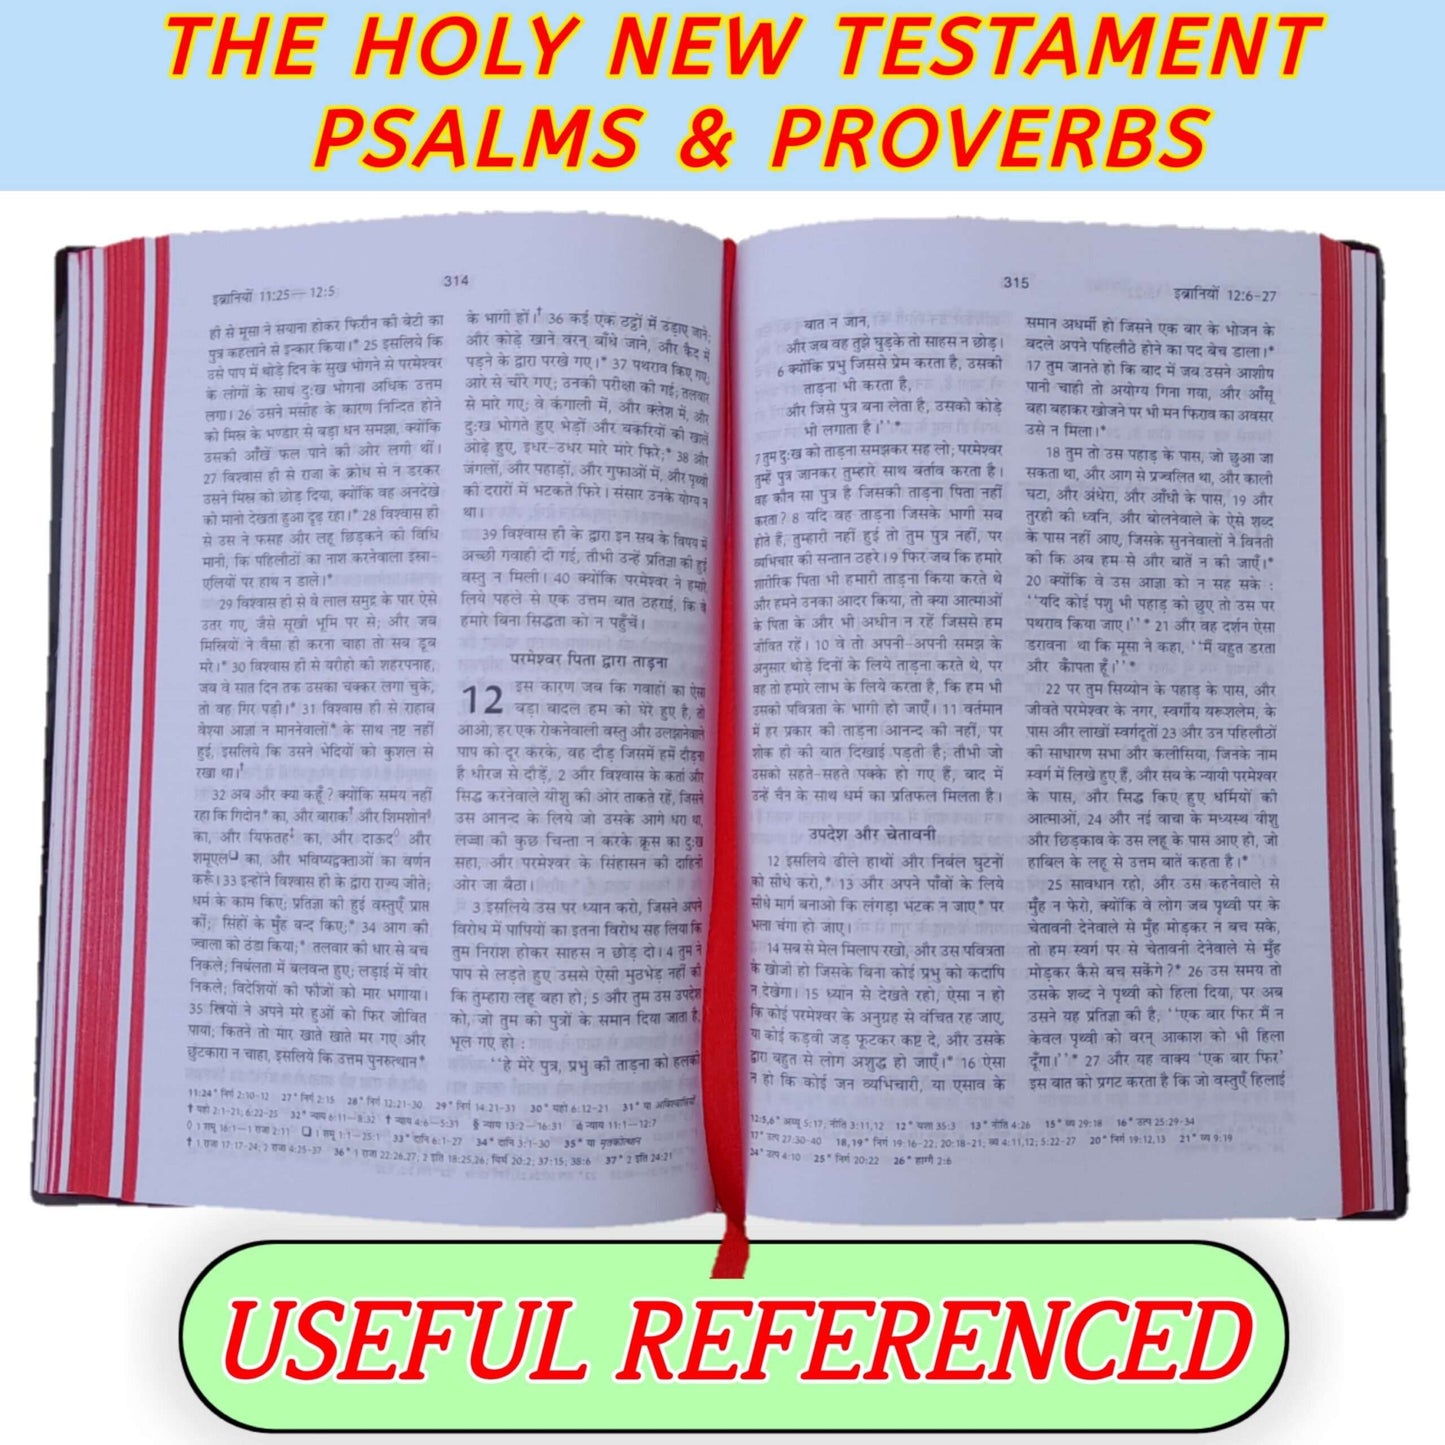 The Holy New Testament Psalms & Proverbs